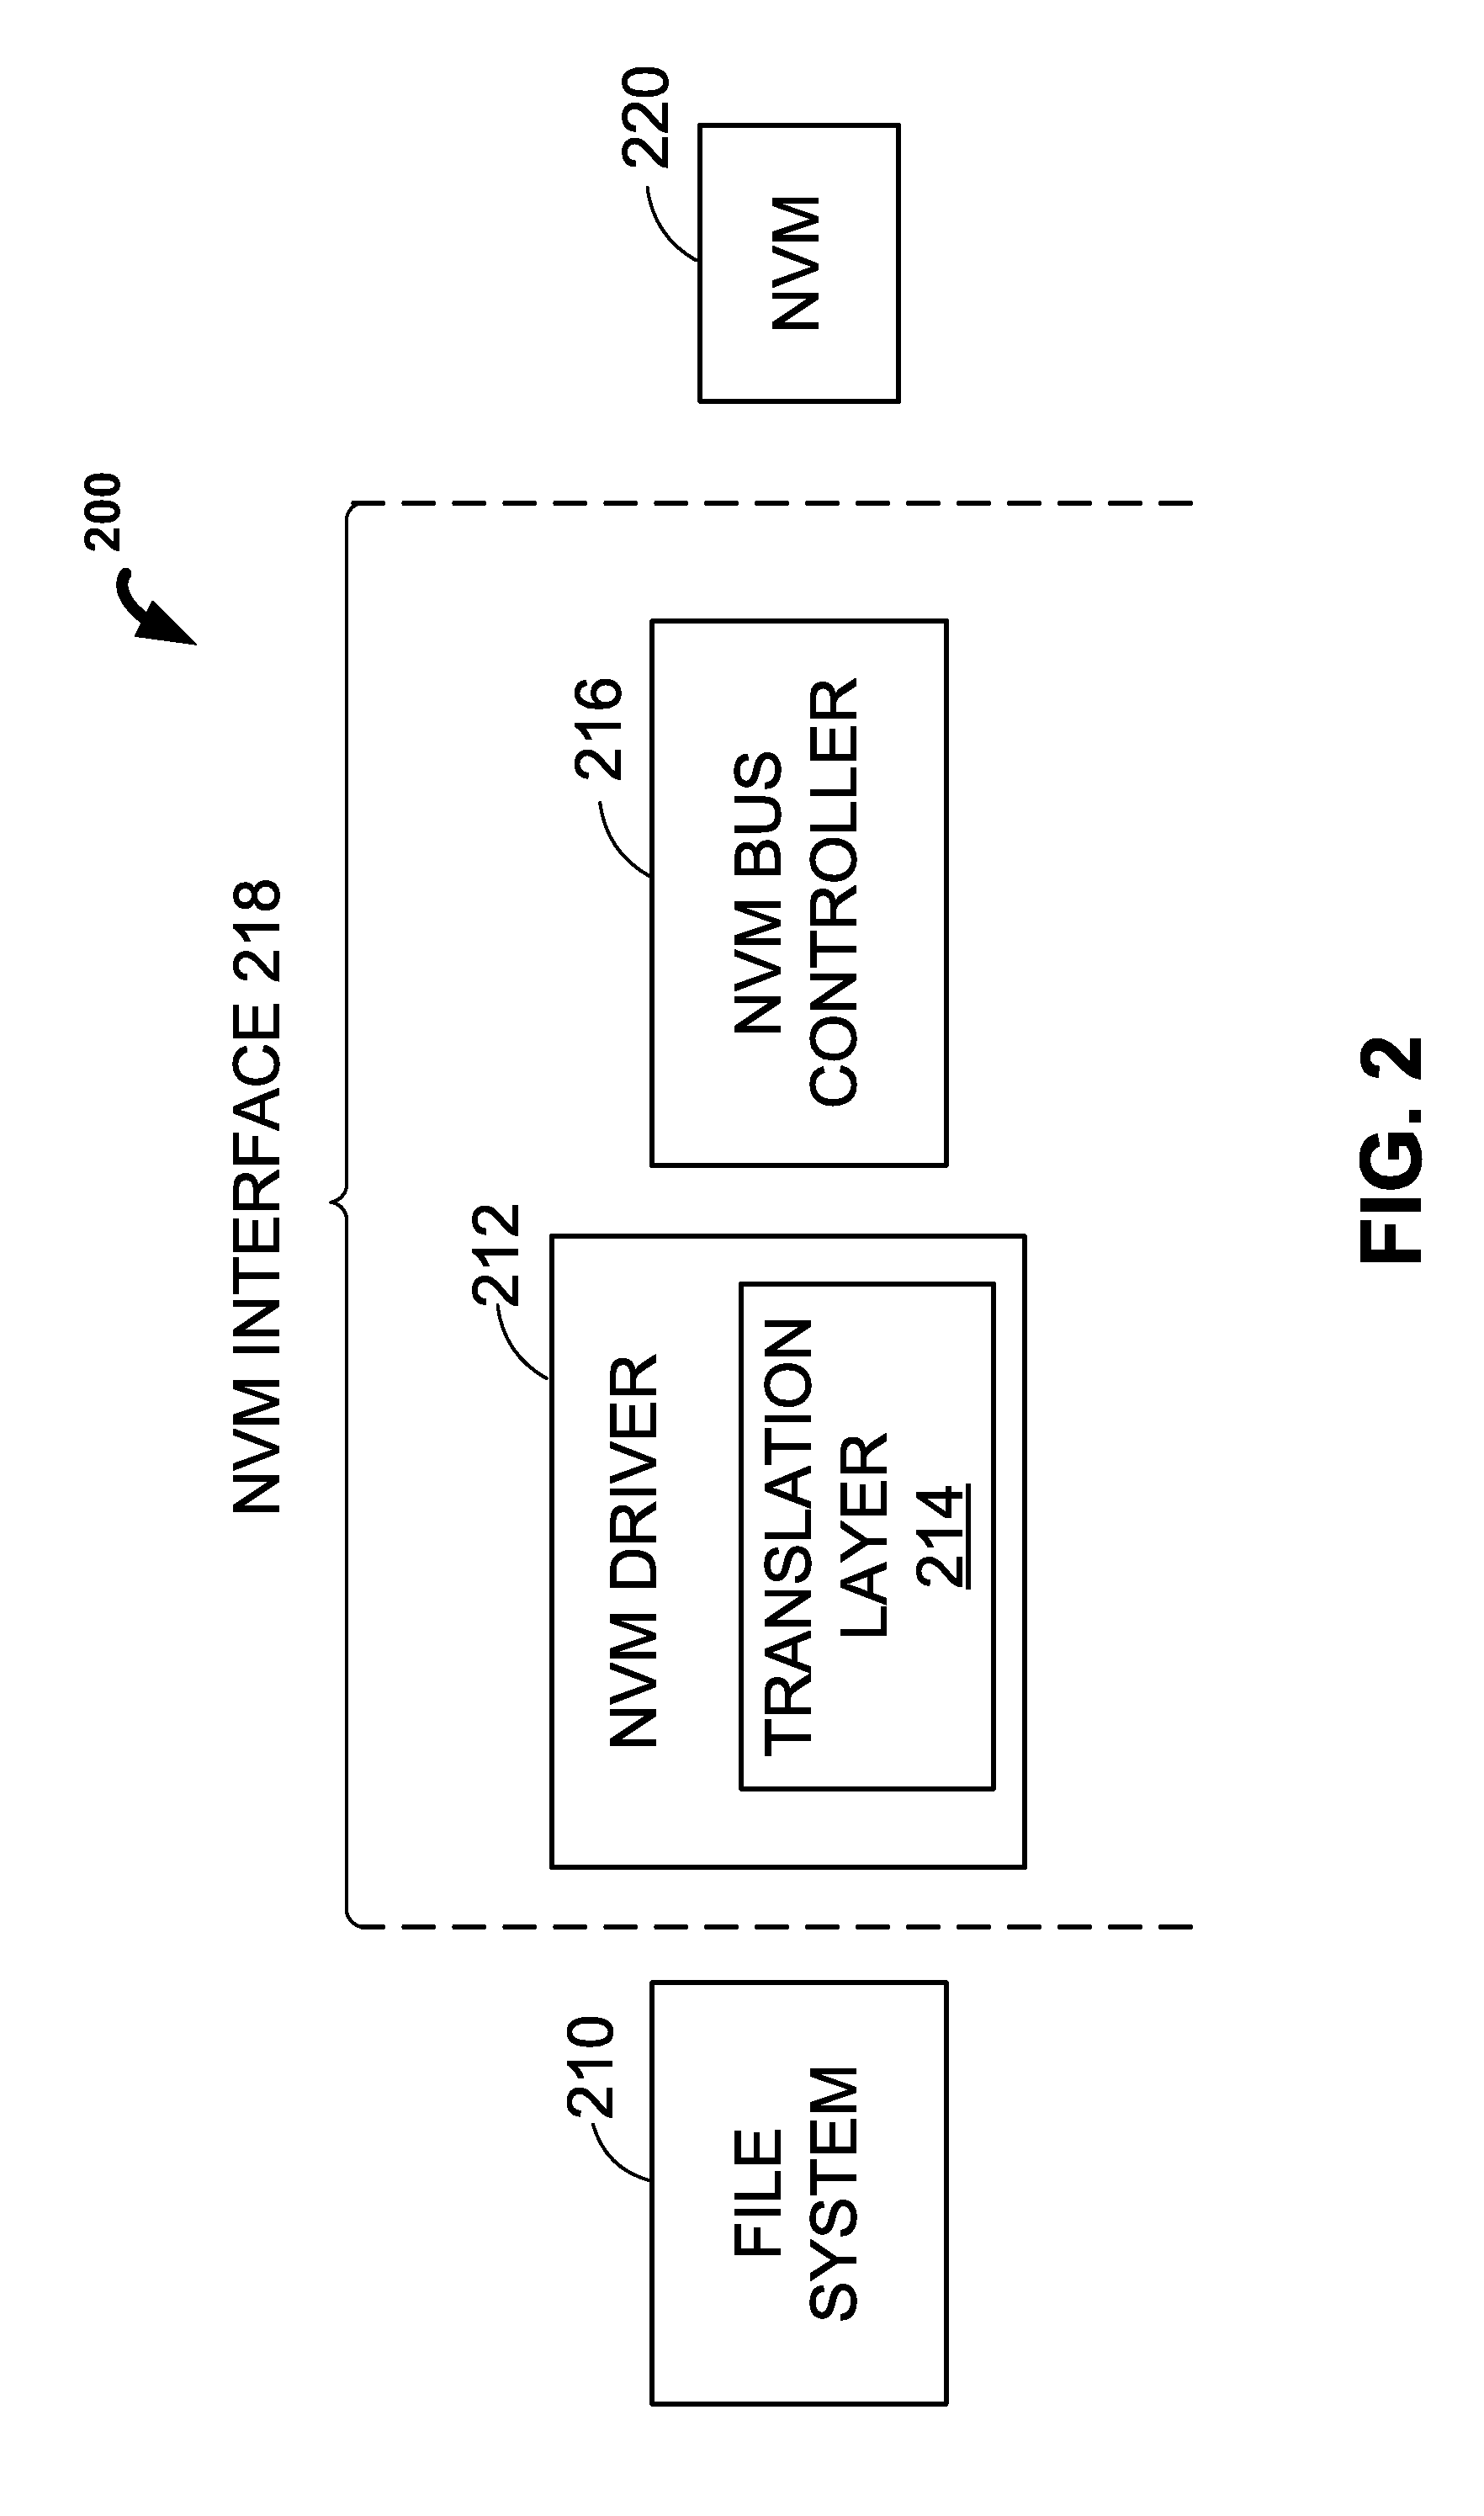 Systems and methods for generating dynamic super blocks